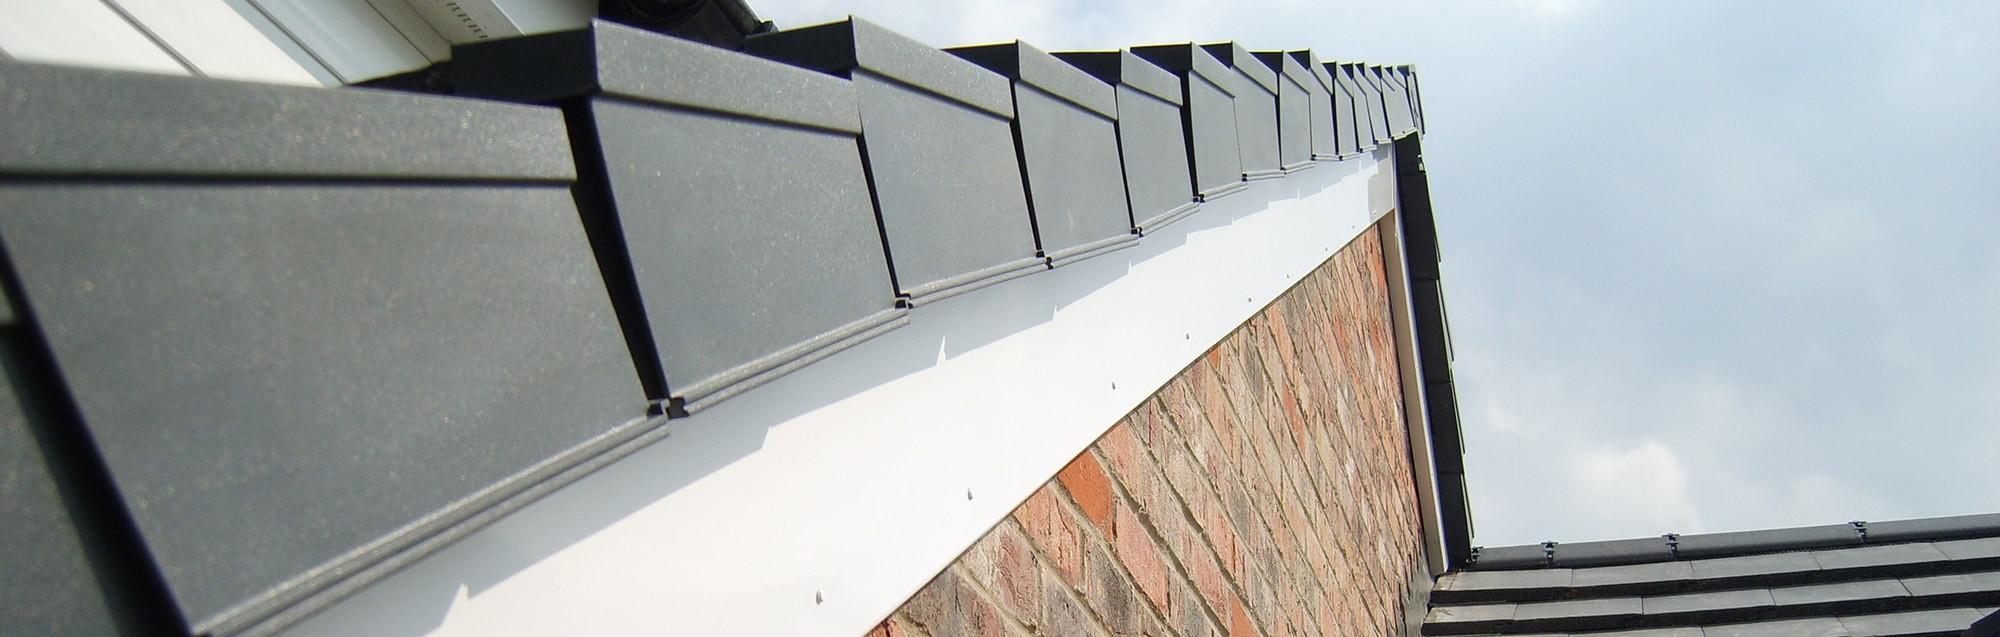 Soffits and facisas